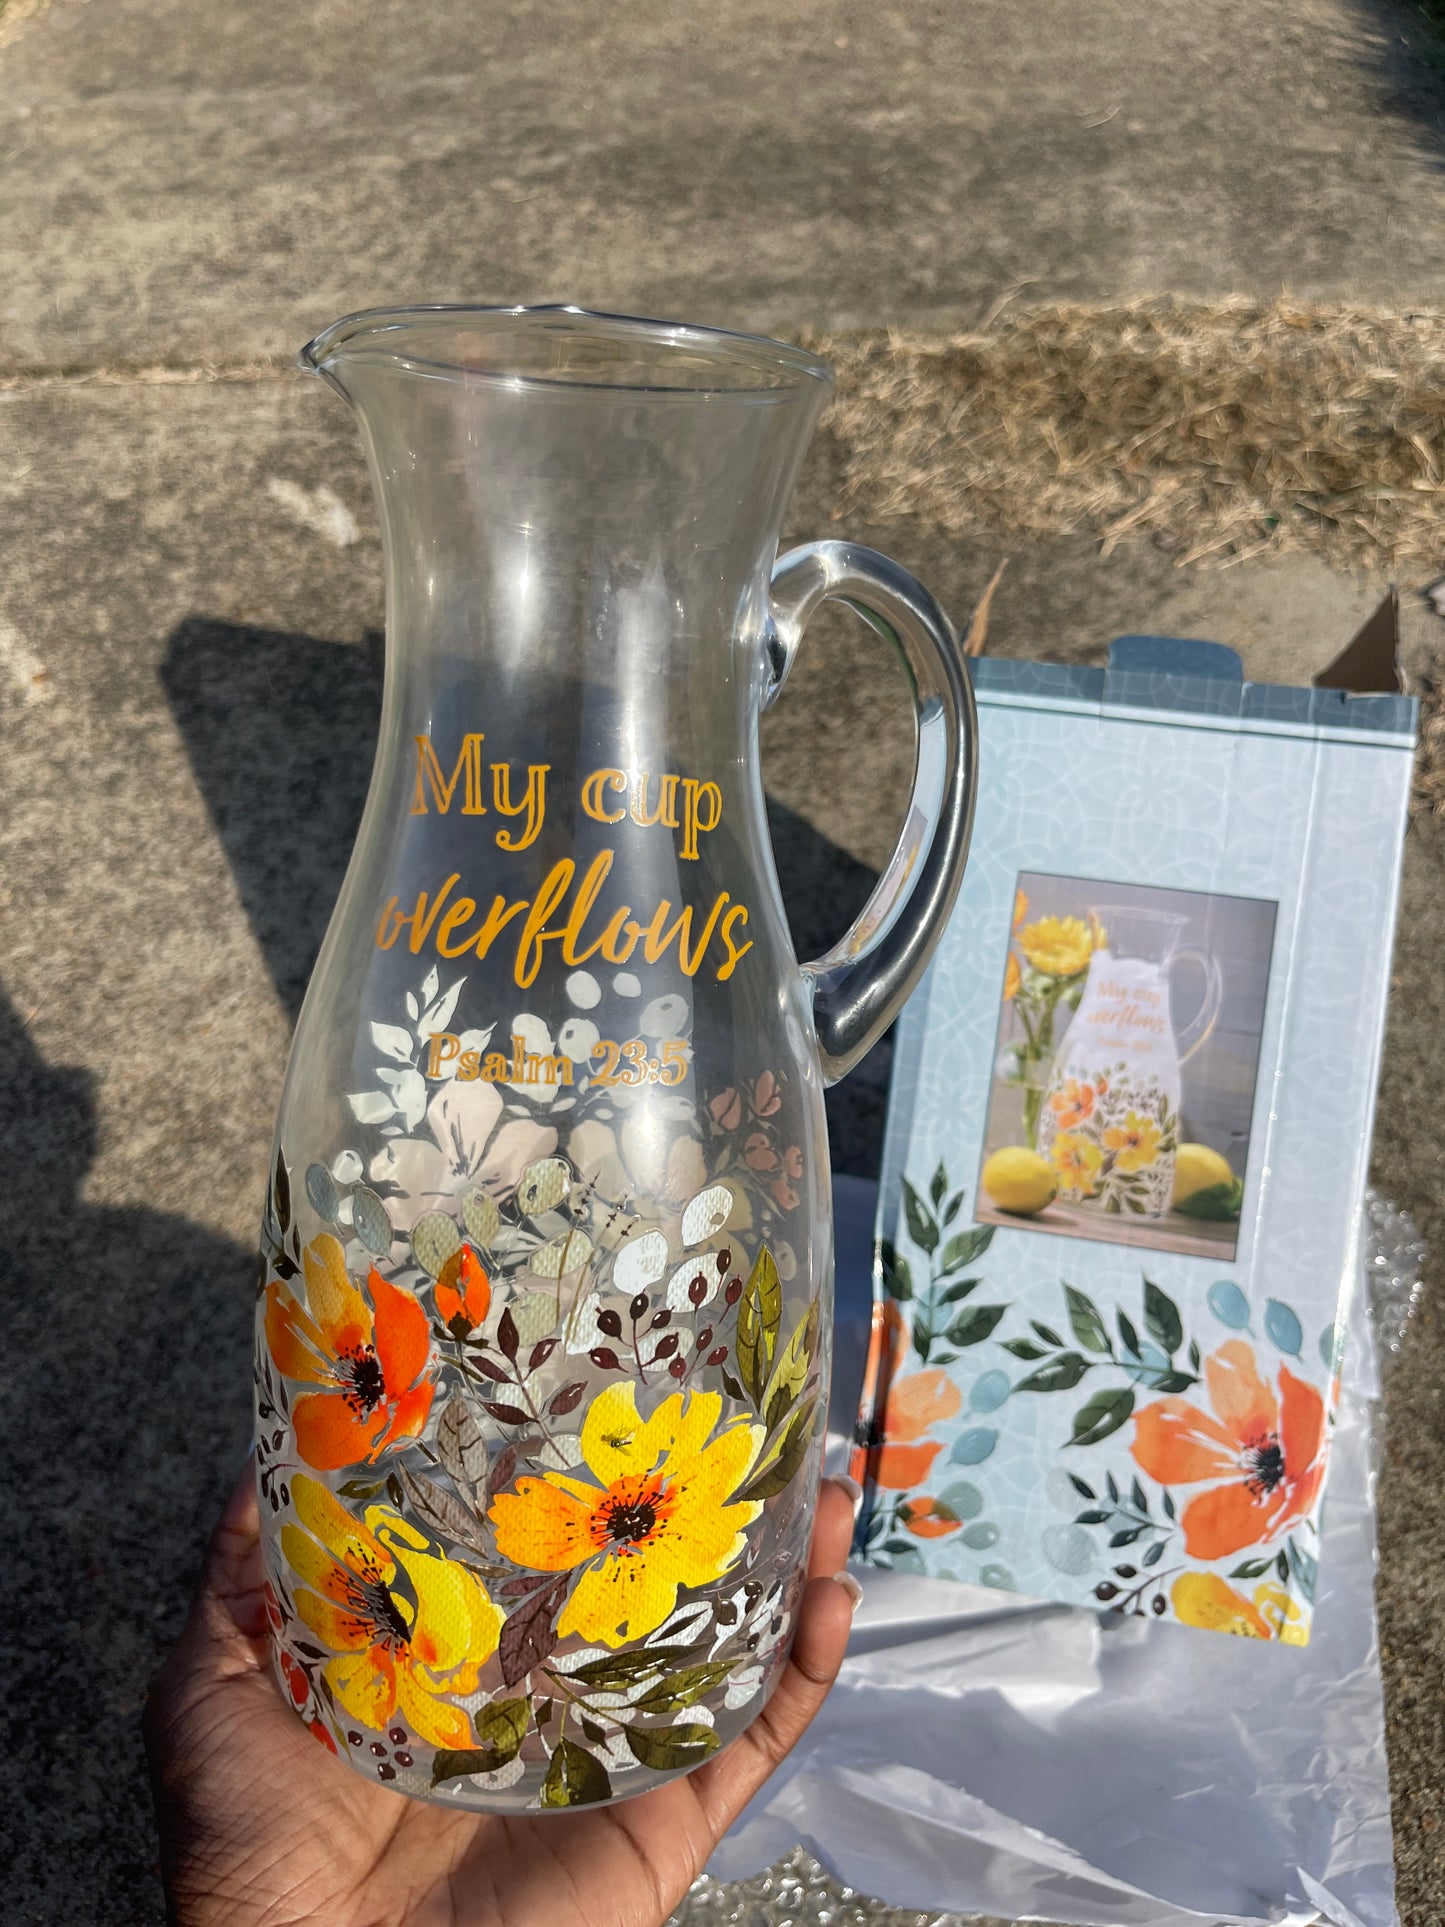 “My cup run over” glass pitcher